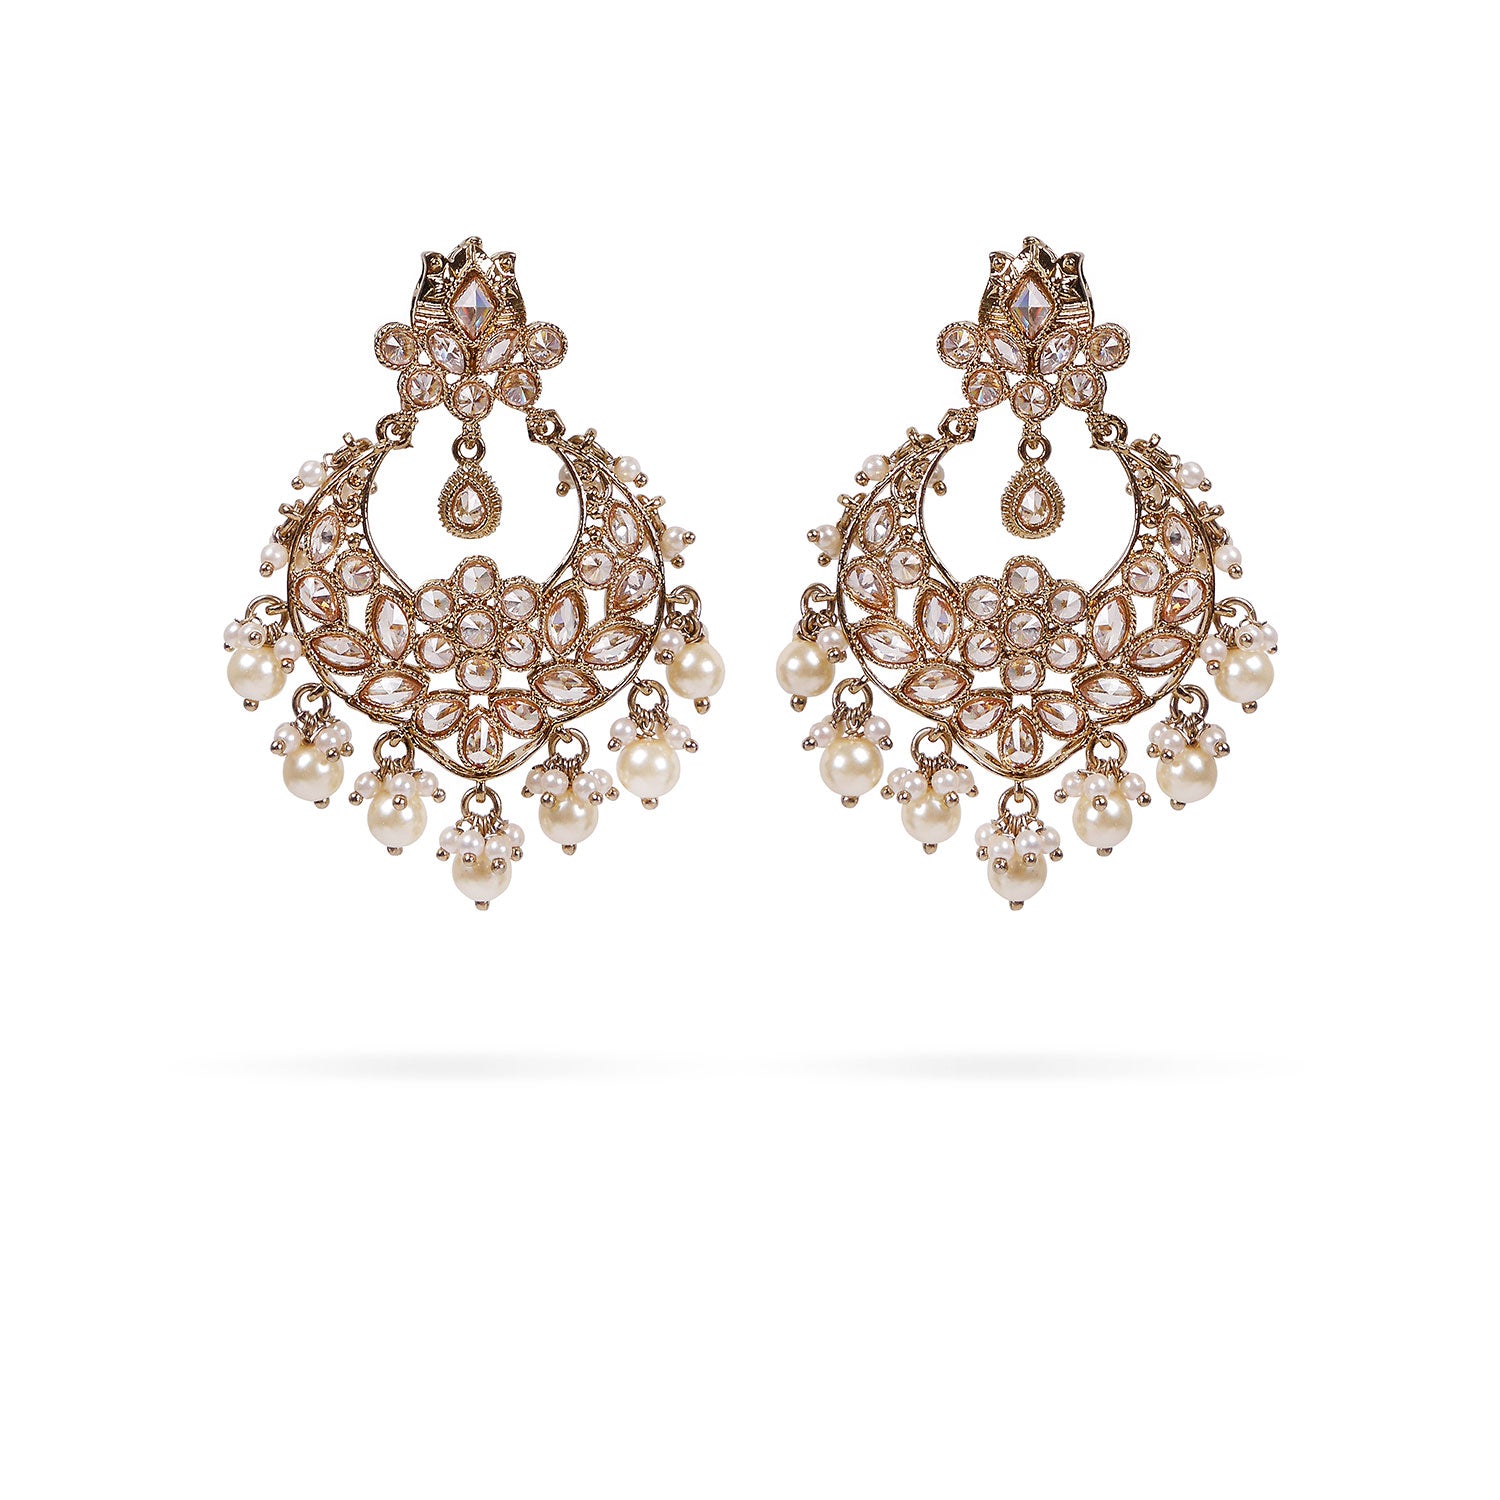 Abena Chandbali Earrings in Pearl and Antique Gold